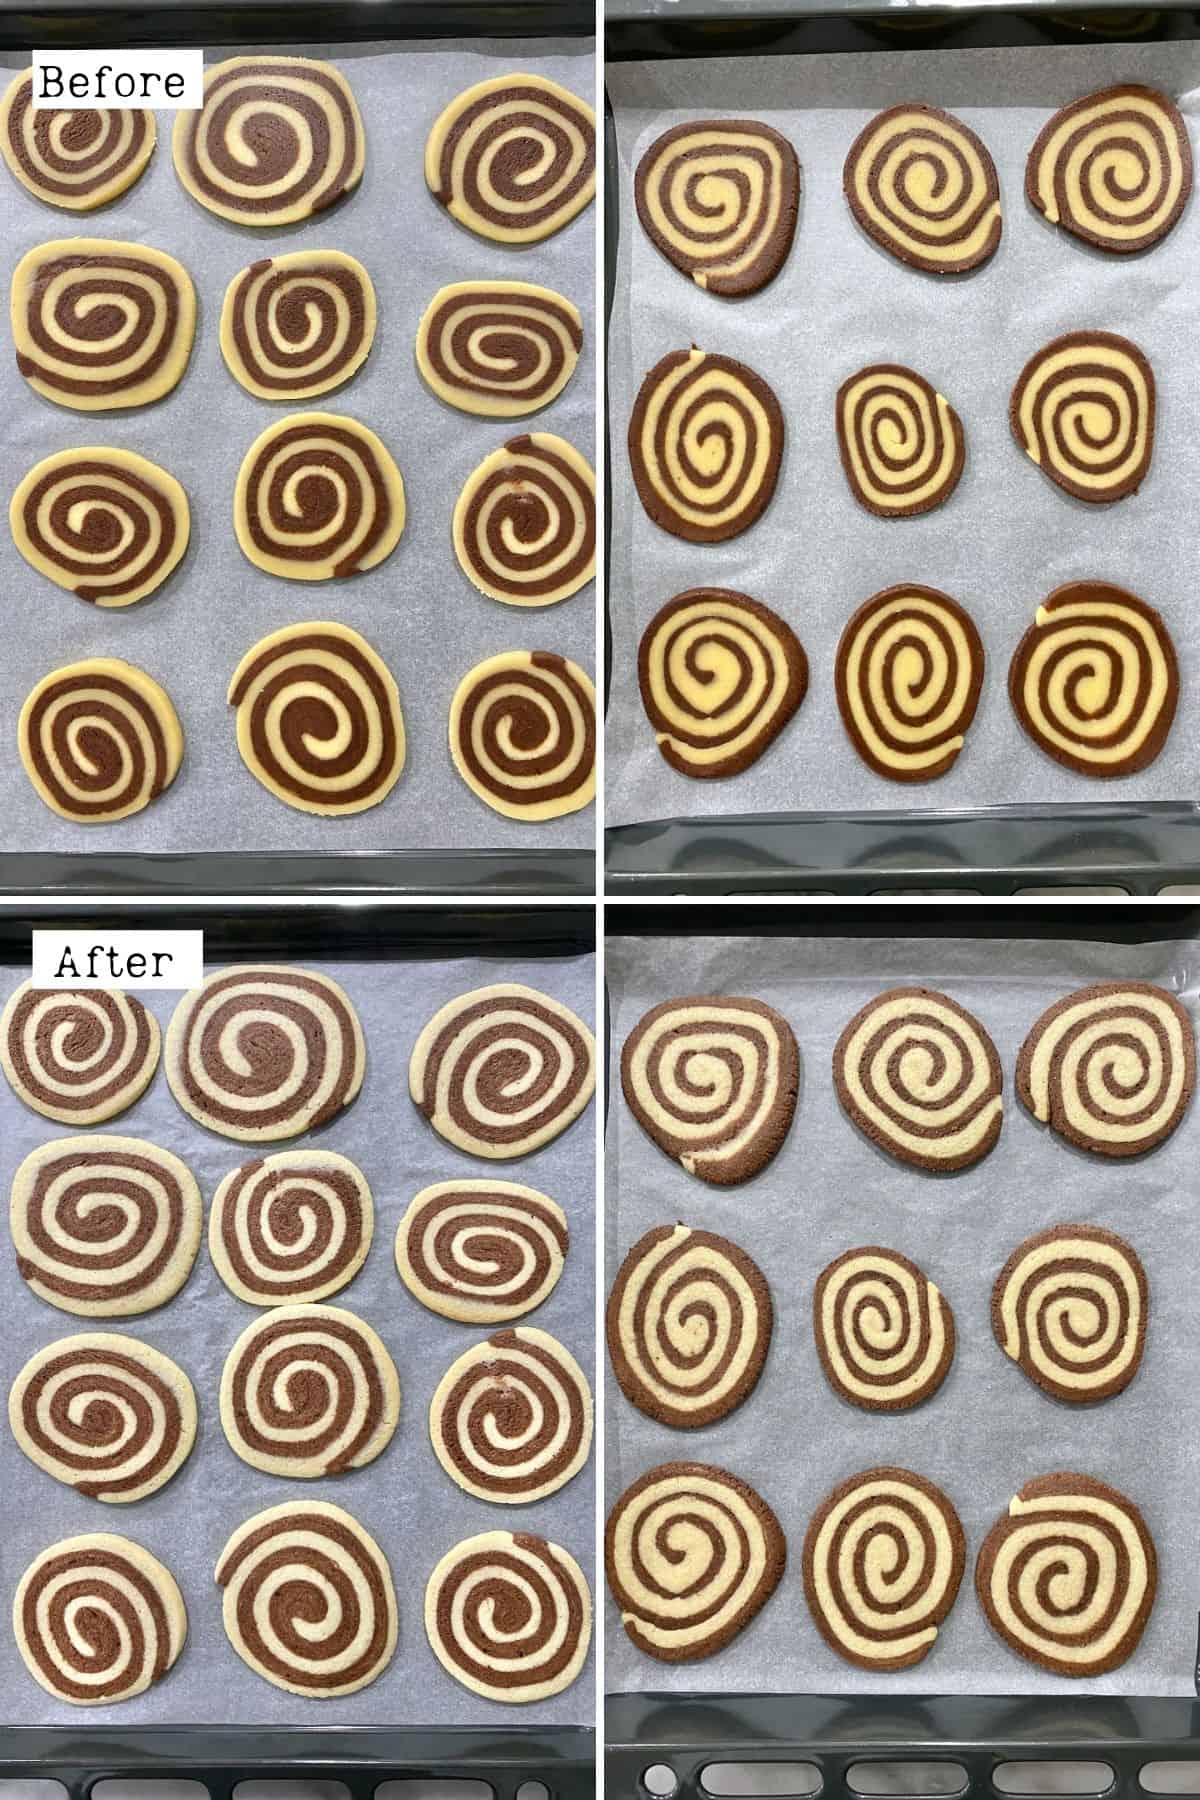 Before and after baking pinwheel cookies